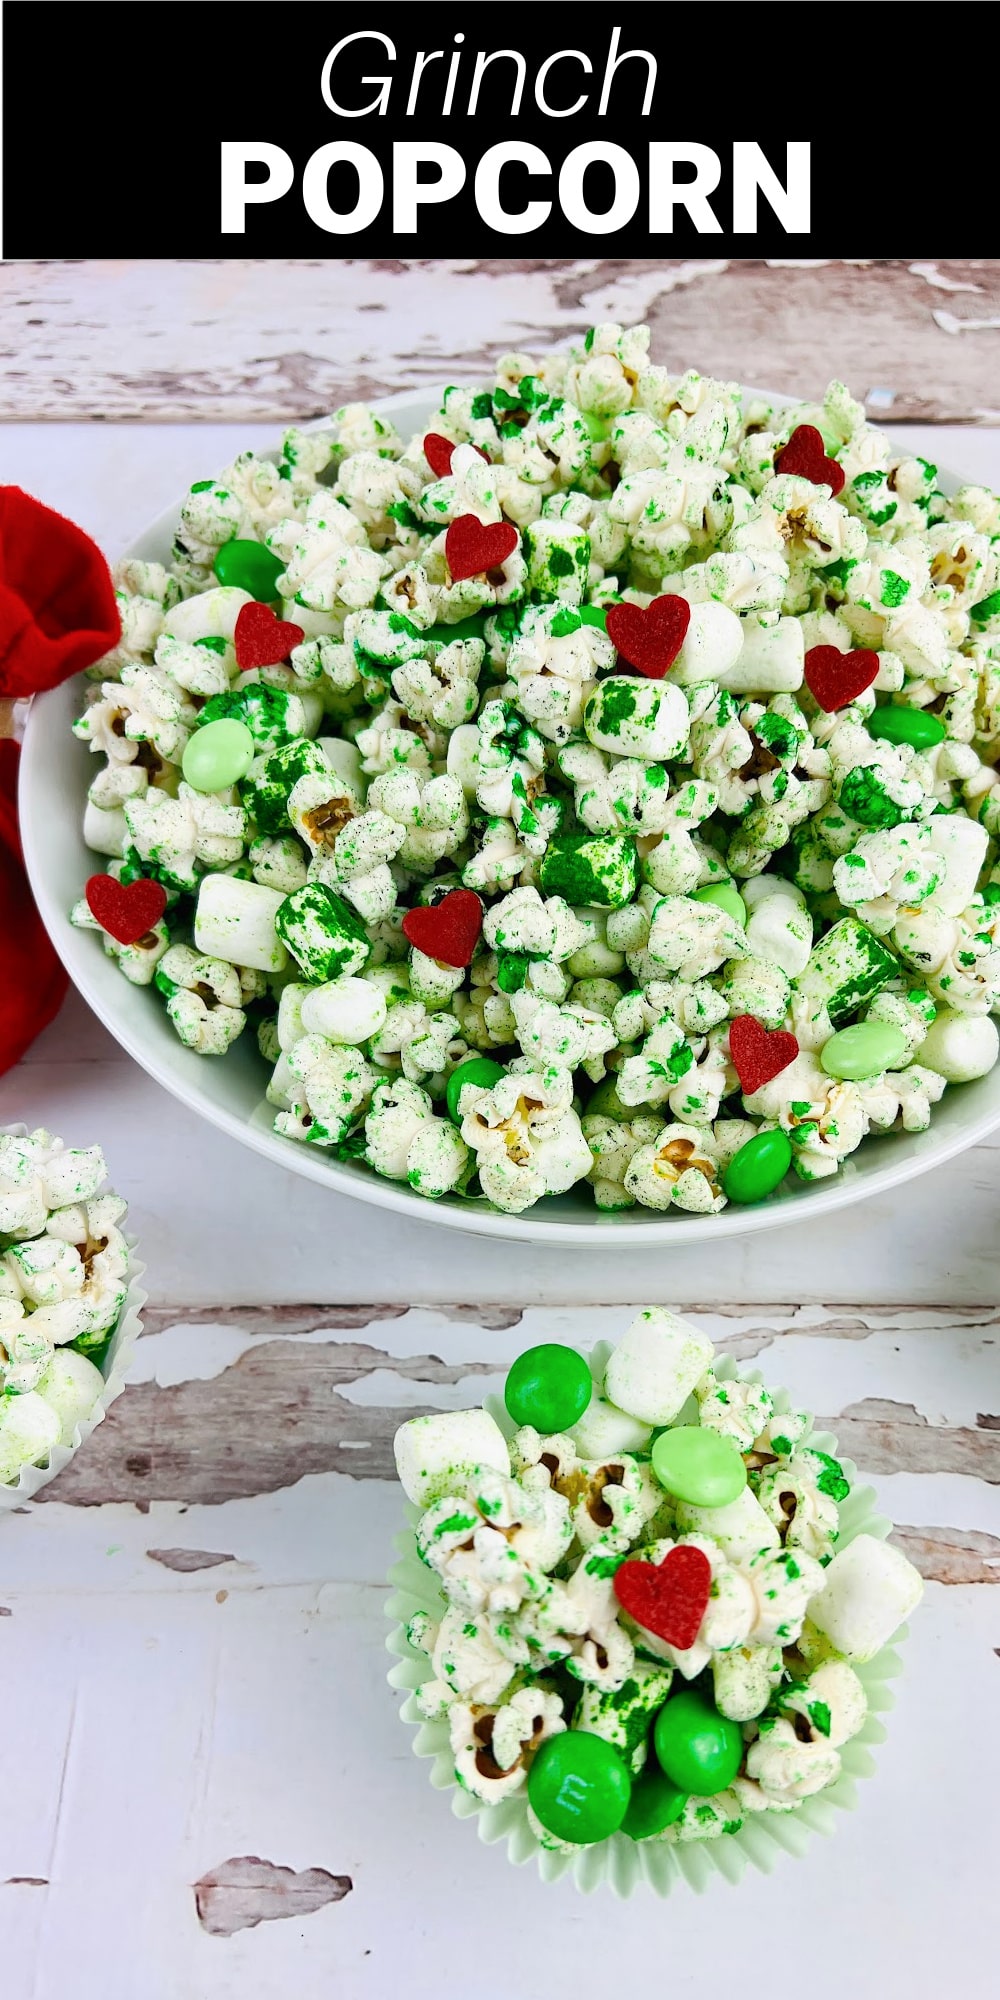 This Grinch popcorn is a festive and delicious snack that deserves a spot in all your holiday family fun. Freshly popped corn is colored a bright shade of Grinch green and topped with mini marshmallows, M&Ms, and adorable tiny red heart candies. It’s an addictively delicious combination of sweet and salty flavors in a cute and fun holiday package.